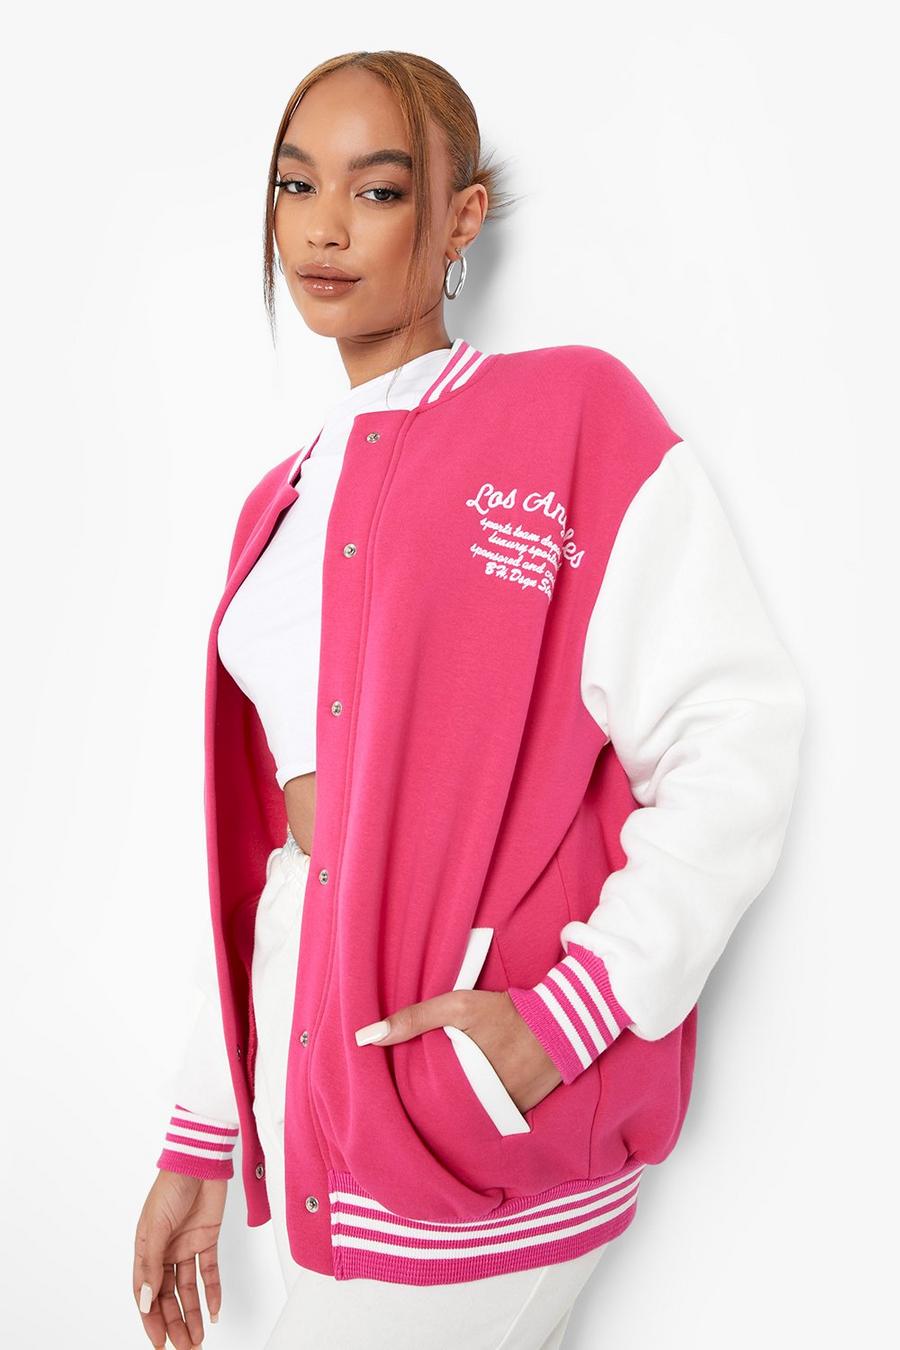 Giacca Bomber stile Varsity con scritta Los Angeles, Hot pink image number 1